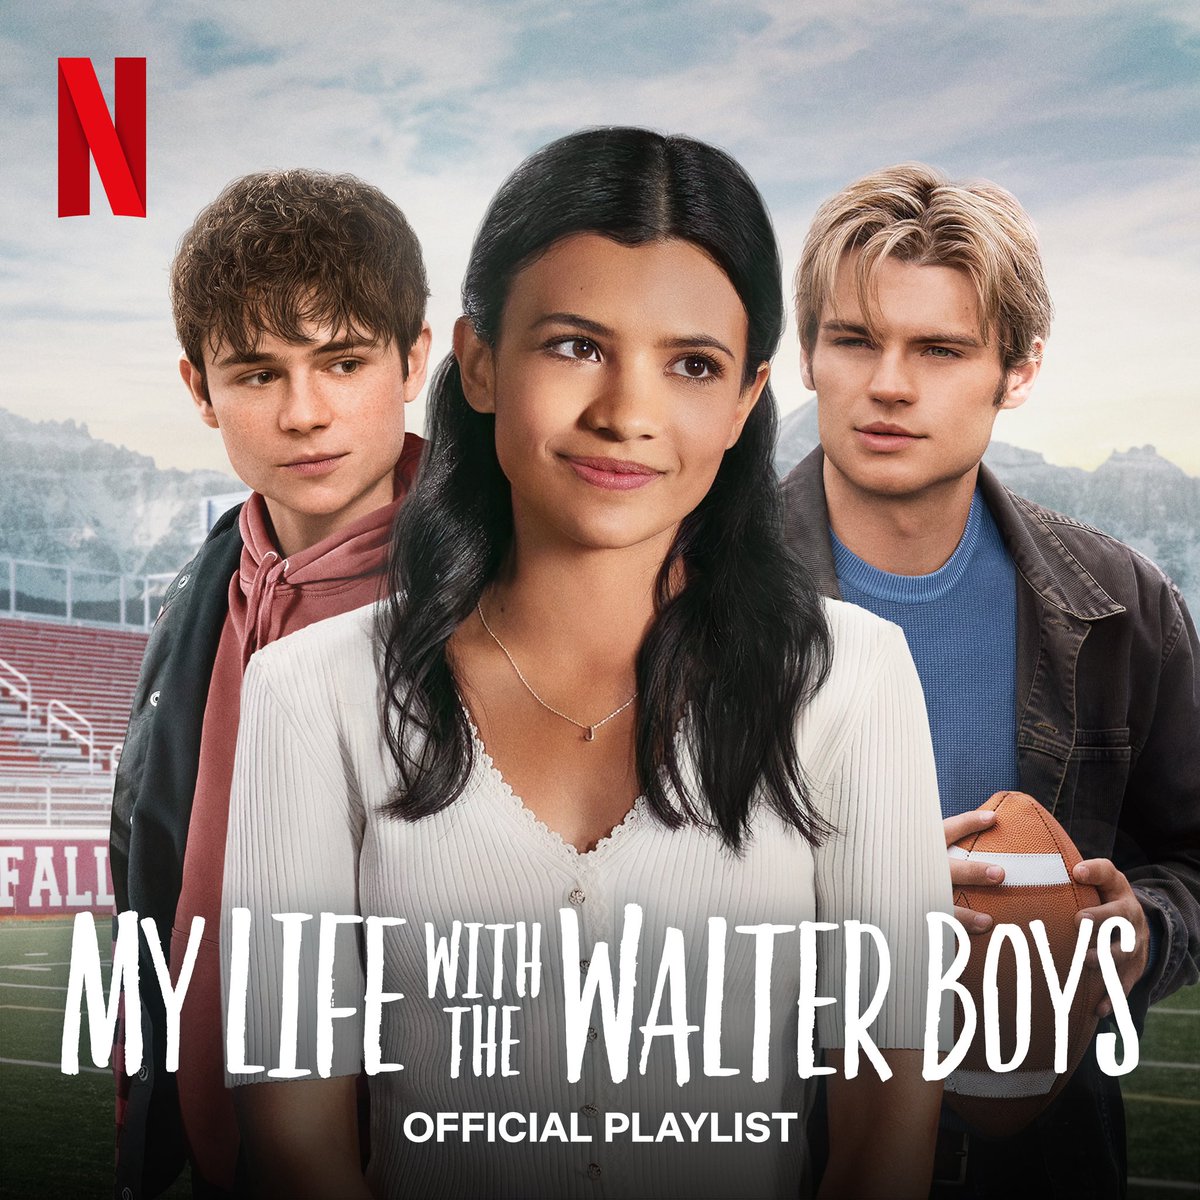 We are pretty thrilled that our song “Pony Up” is on this new @Netflix_CA series which is currently the #1 Netflix show worldwide!! Pretty great way to wrap up 2023 🙌 #mylifewiththewalterboys